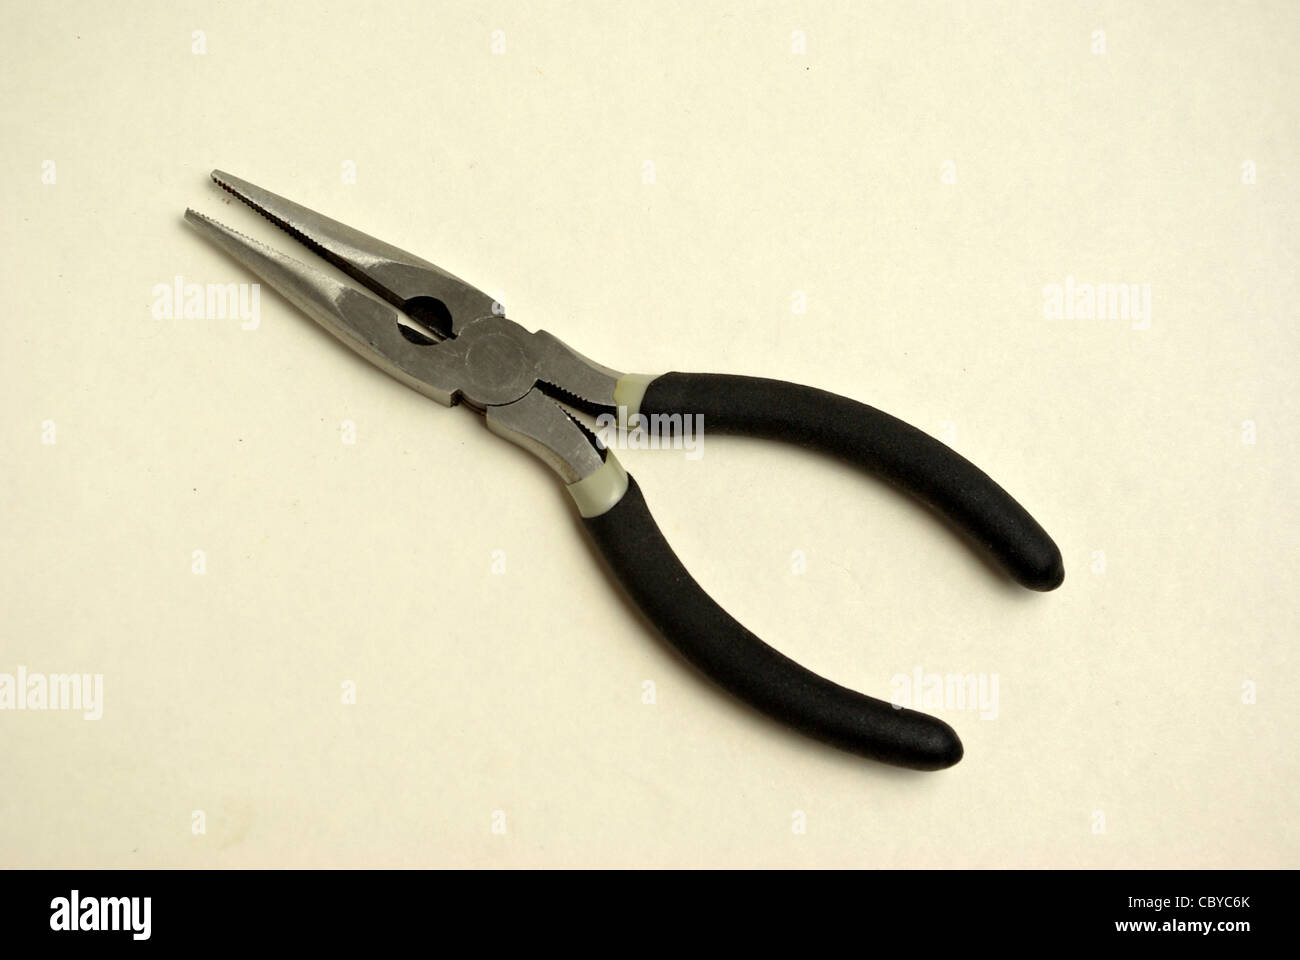 A pair of needle nose pliers sits on a white background Stock Photo